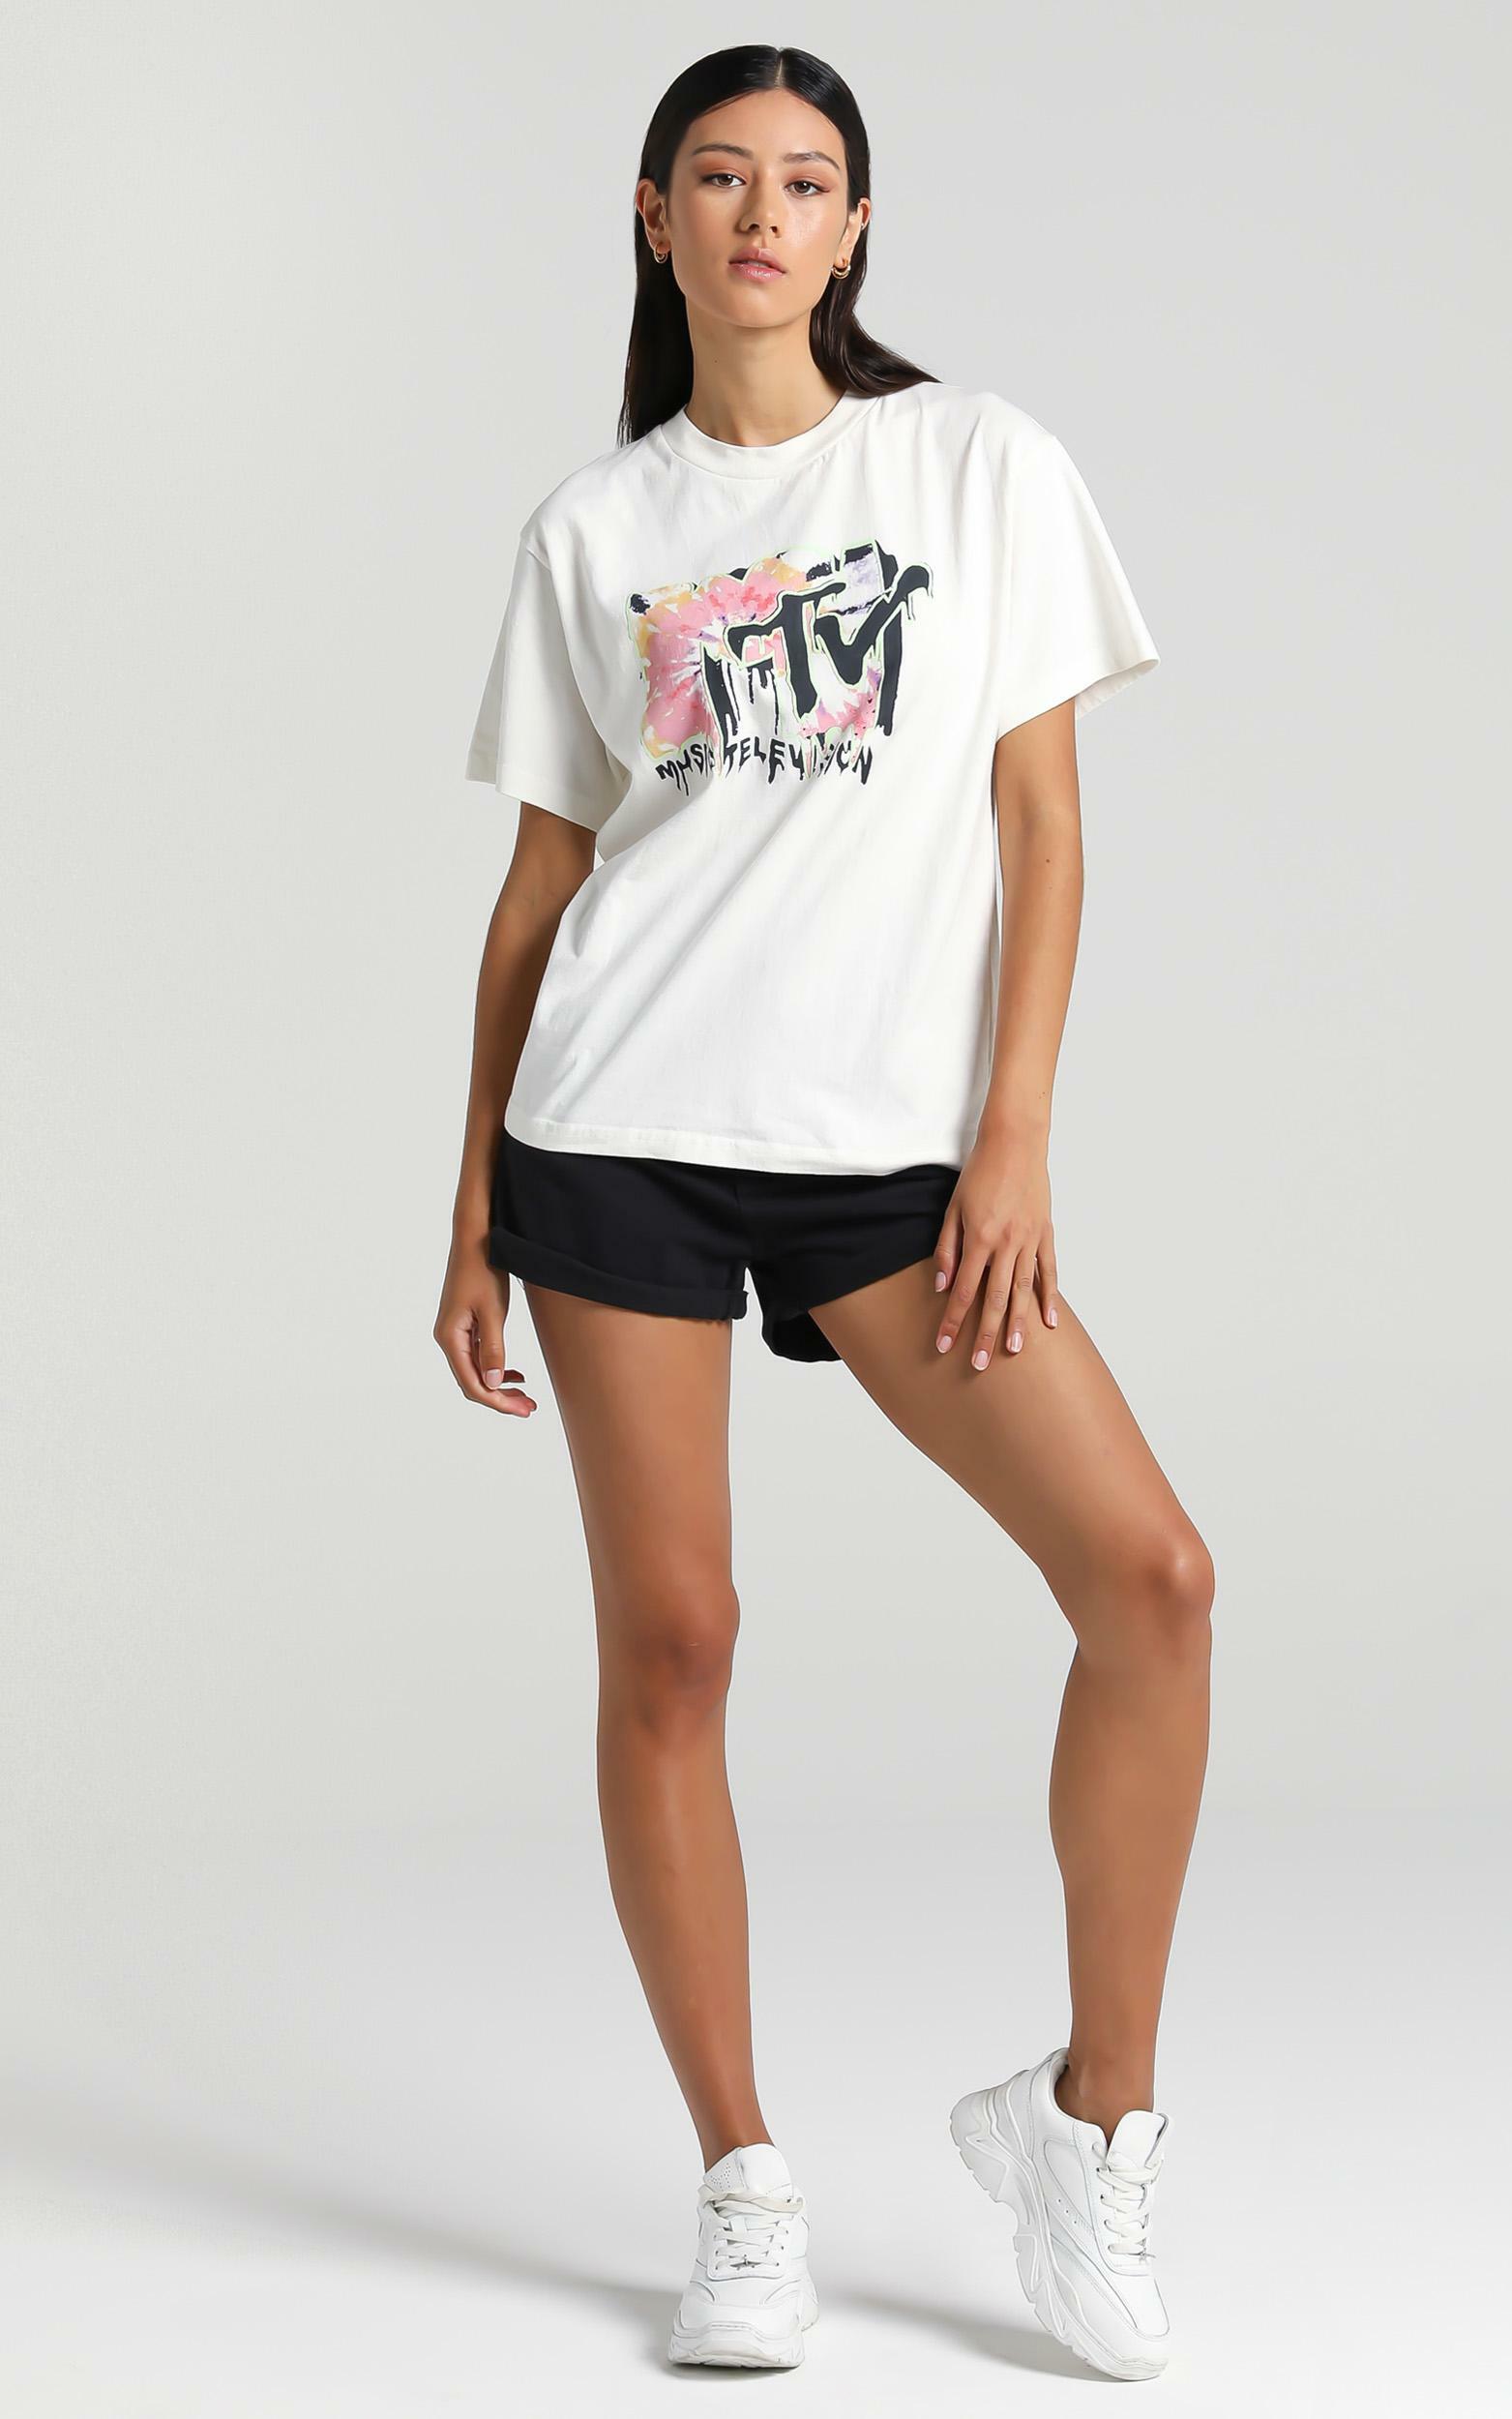 Rollas - Tomboy MTV Tie Dye Tee in White - 6 (XS), White, hi-res image number null